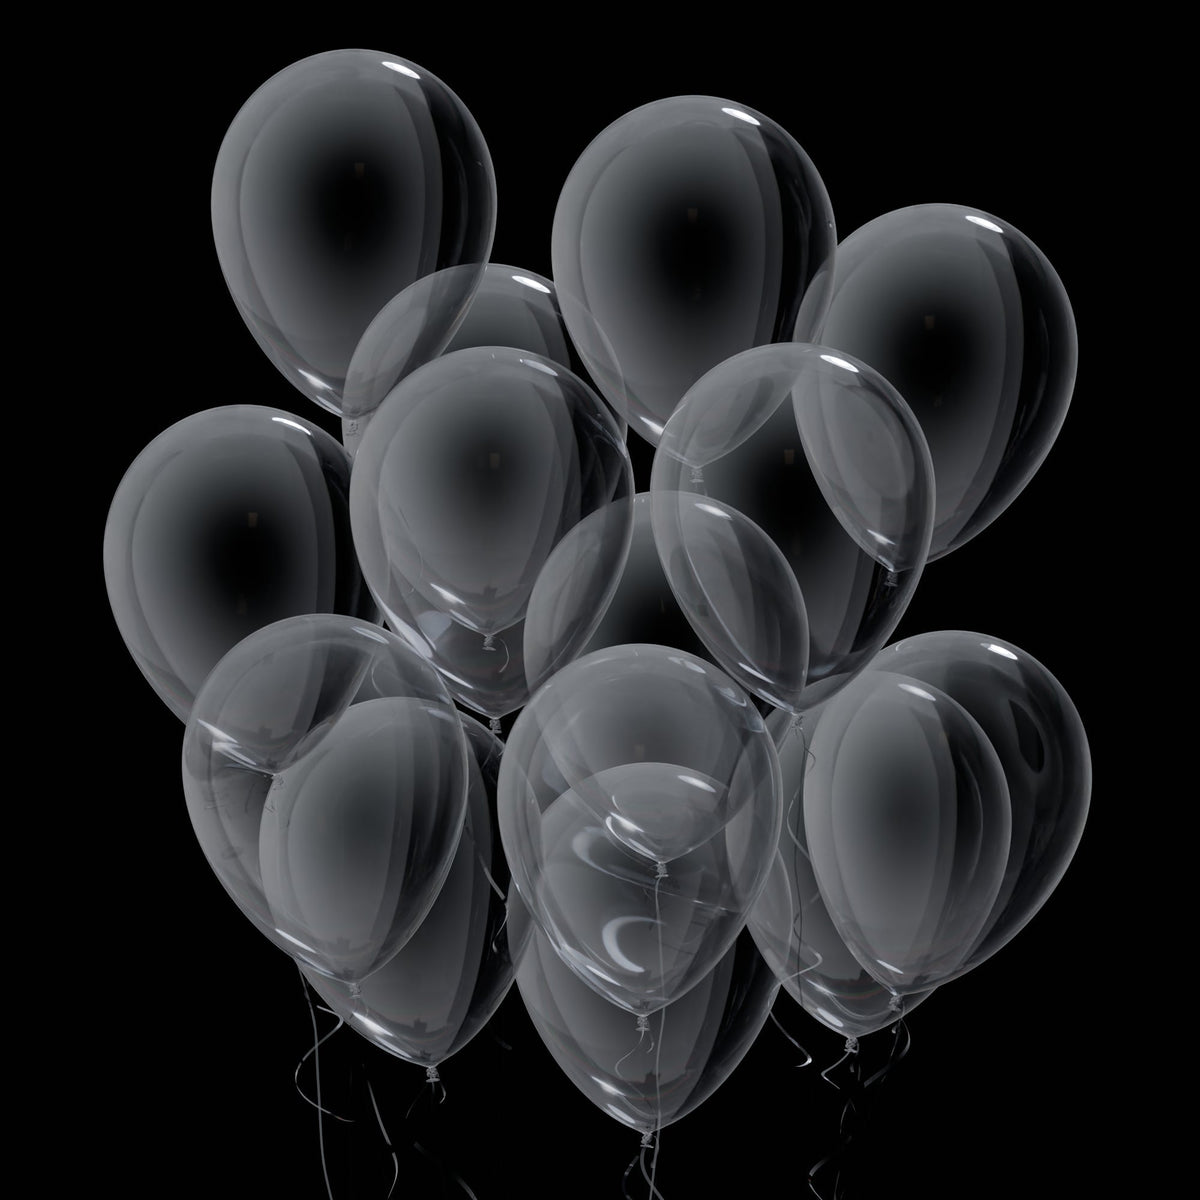 WIDE OCEAN INTERNATIONAL TRADE BEIJING CO., LTD Balloons Clear Latex Balloon 12 Inches, 72 Count 810064197444